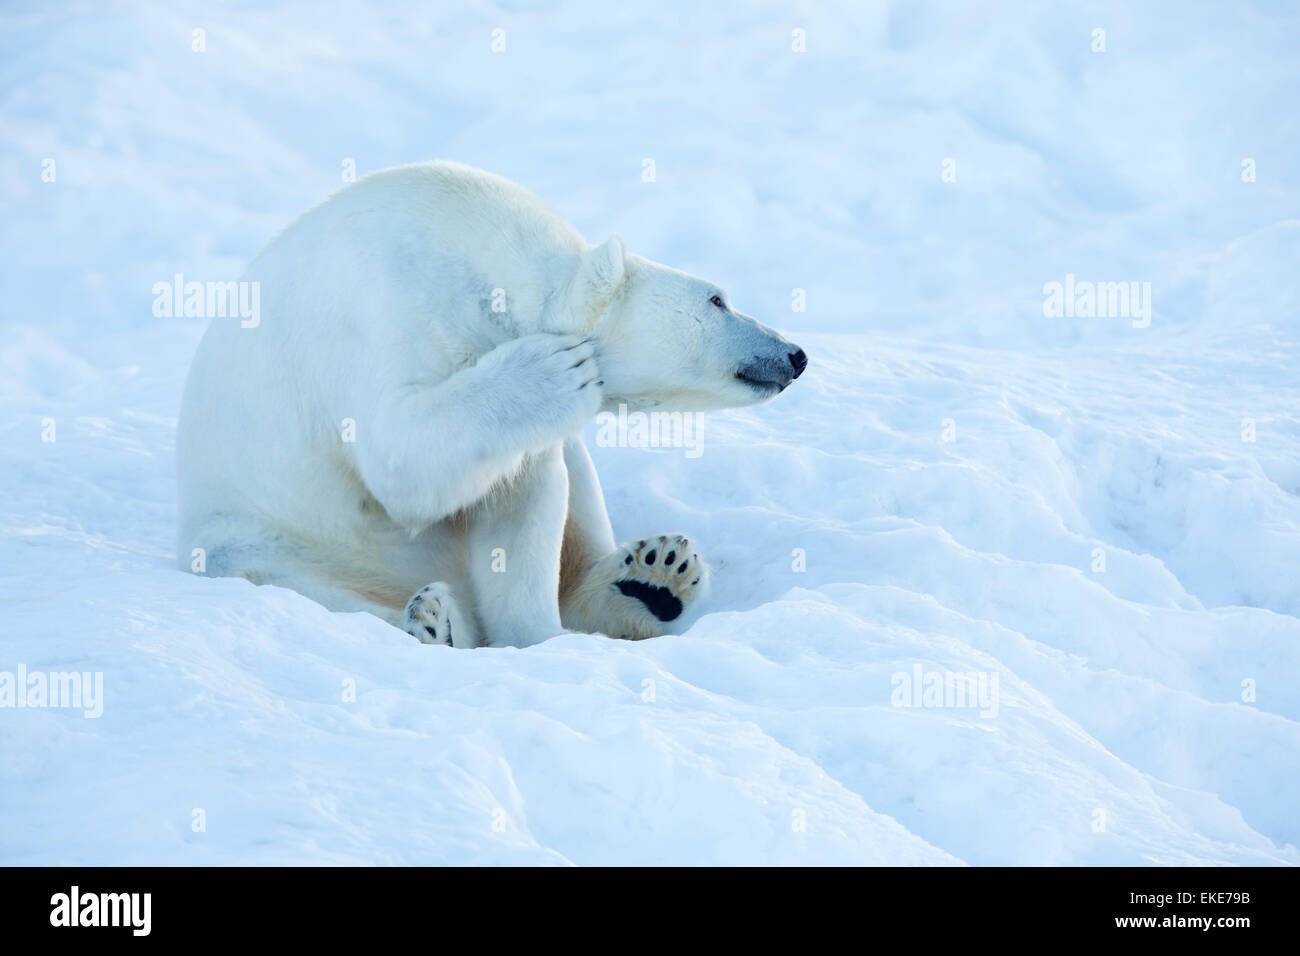 Polar bear (Ursus maritimus) scratching and cleaning itself in the snow Stock Photo